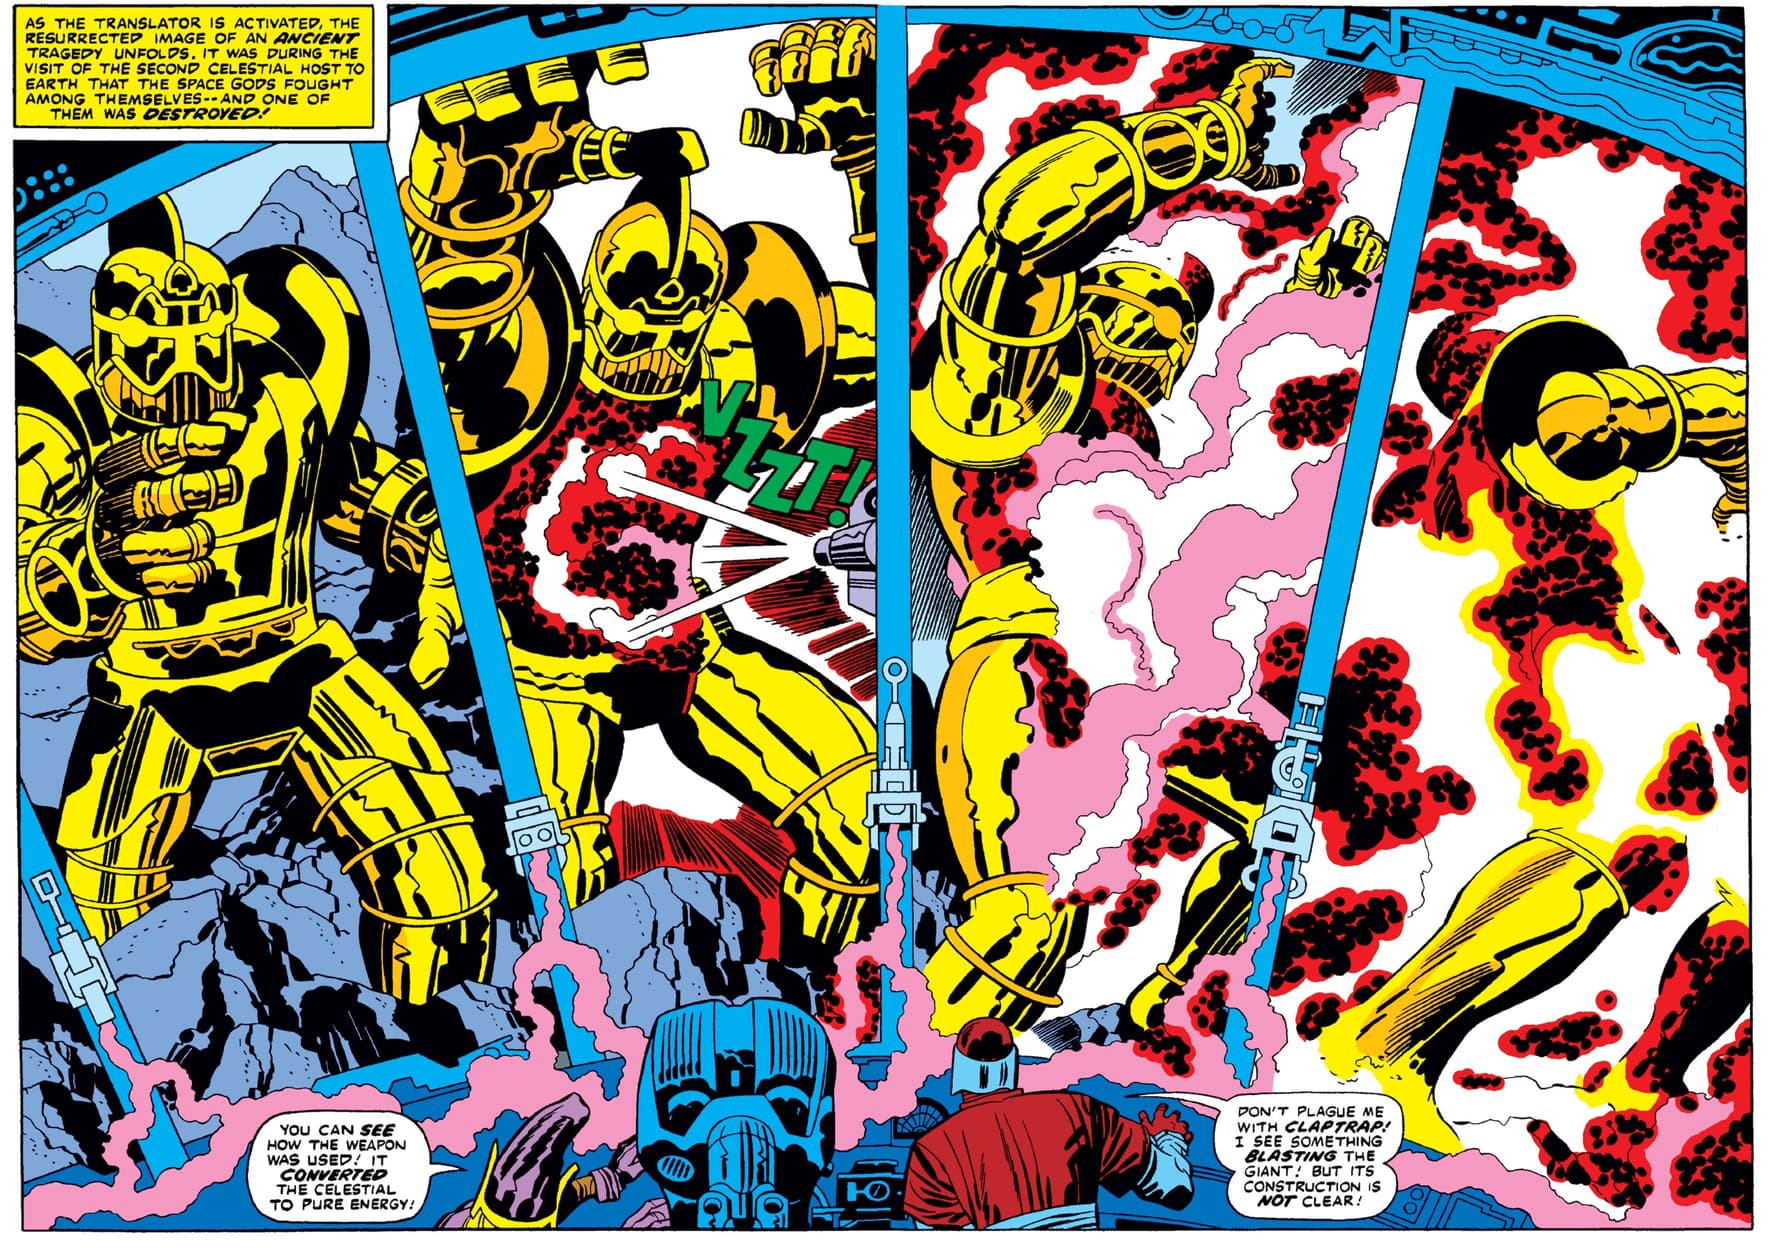 The end of a Celestial in ETERNALS (1976) #18.